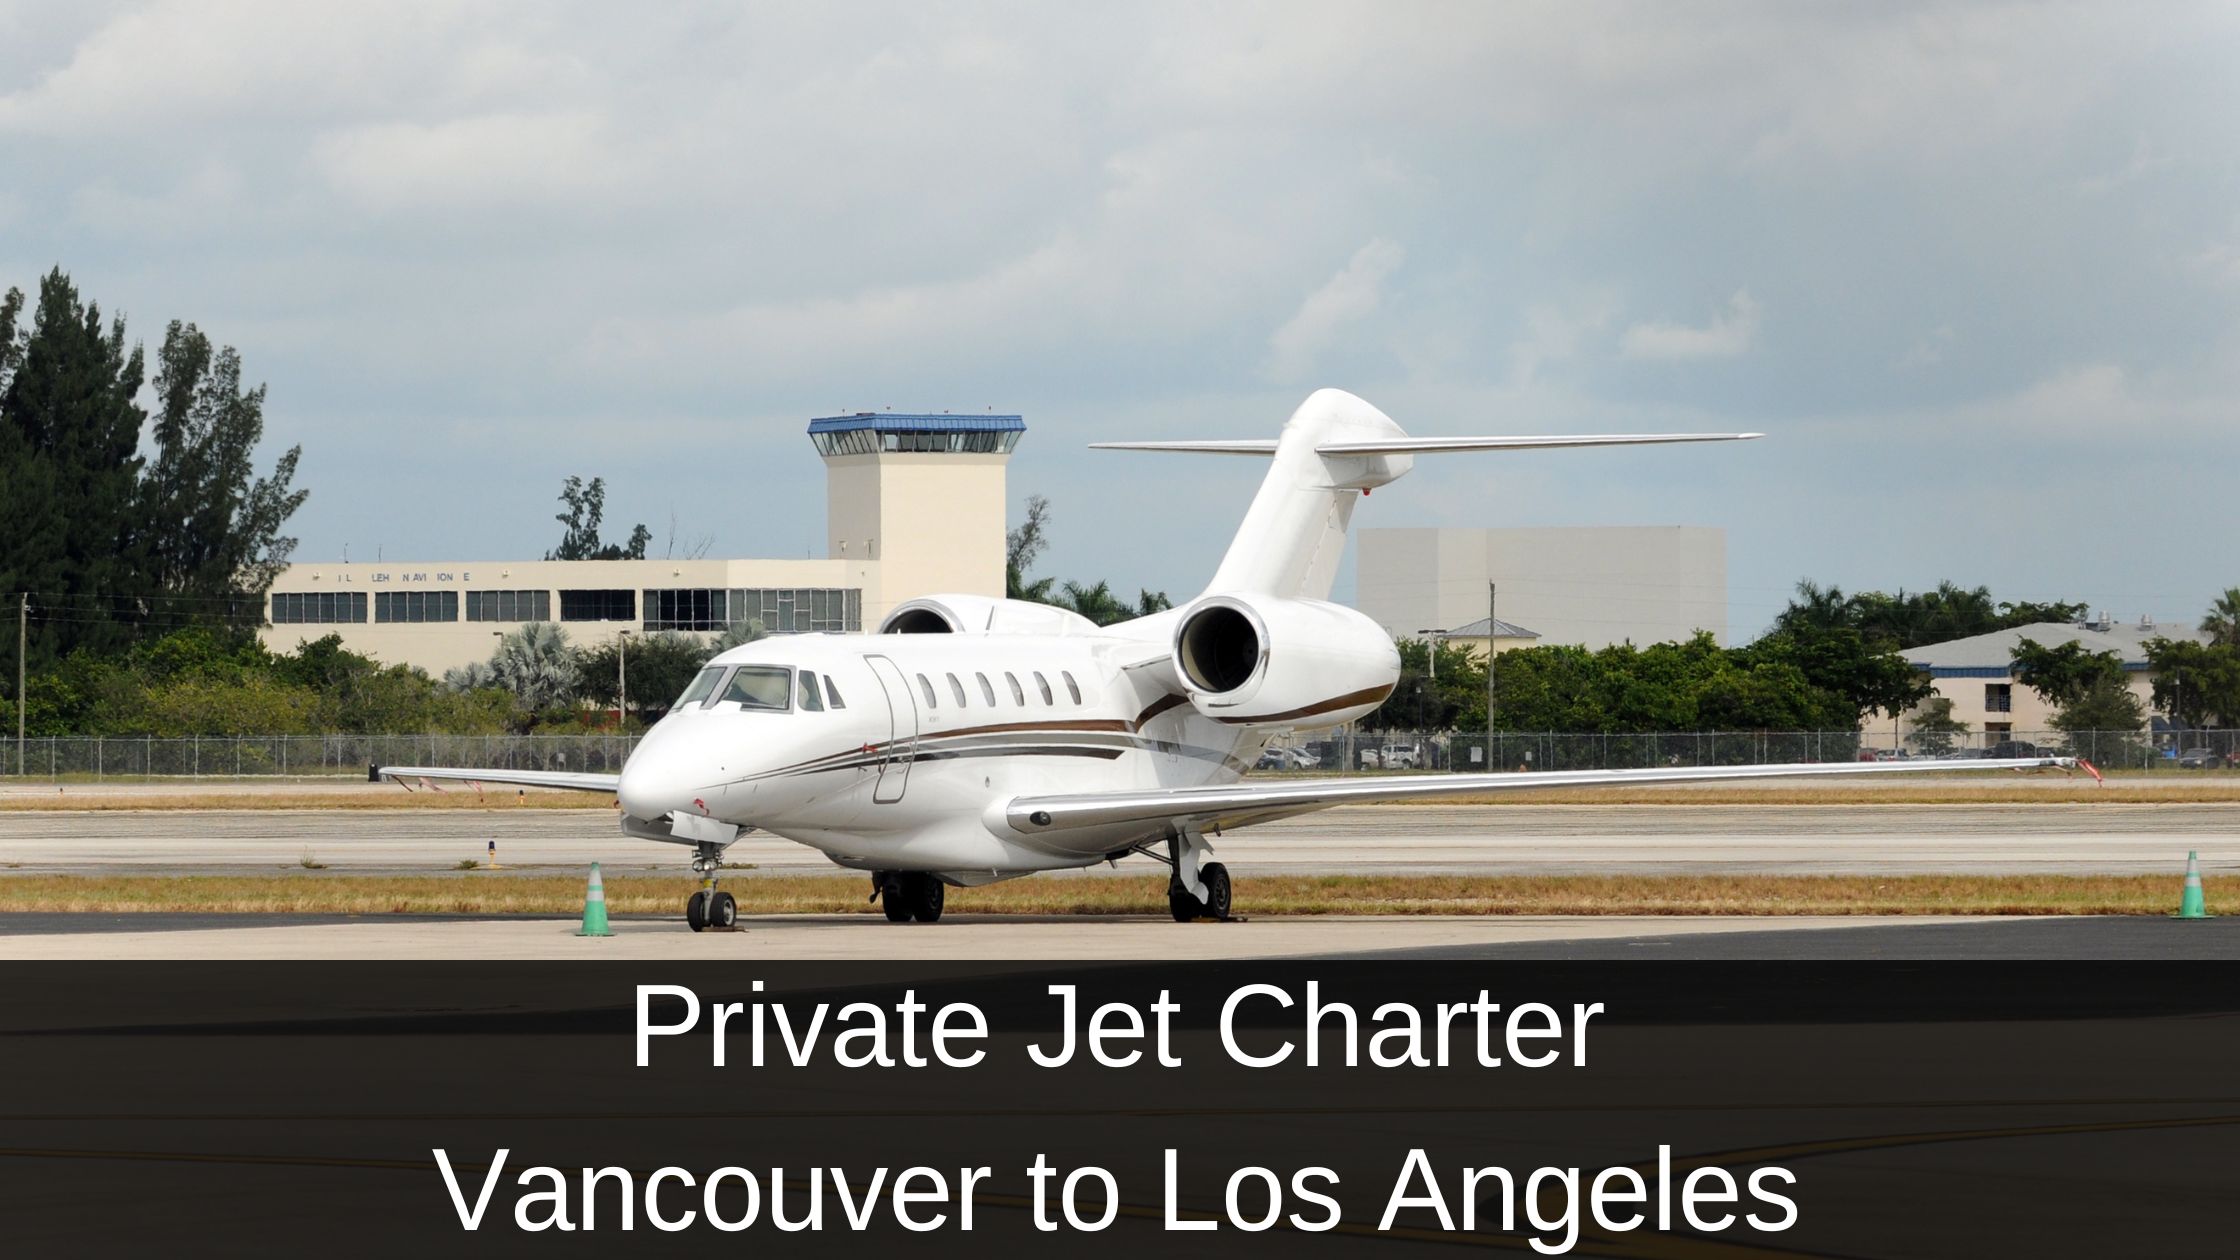 Private Jet Charter Vancouver to Los Angeles